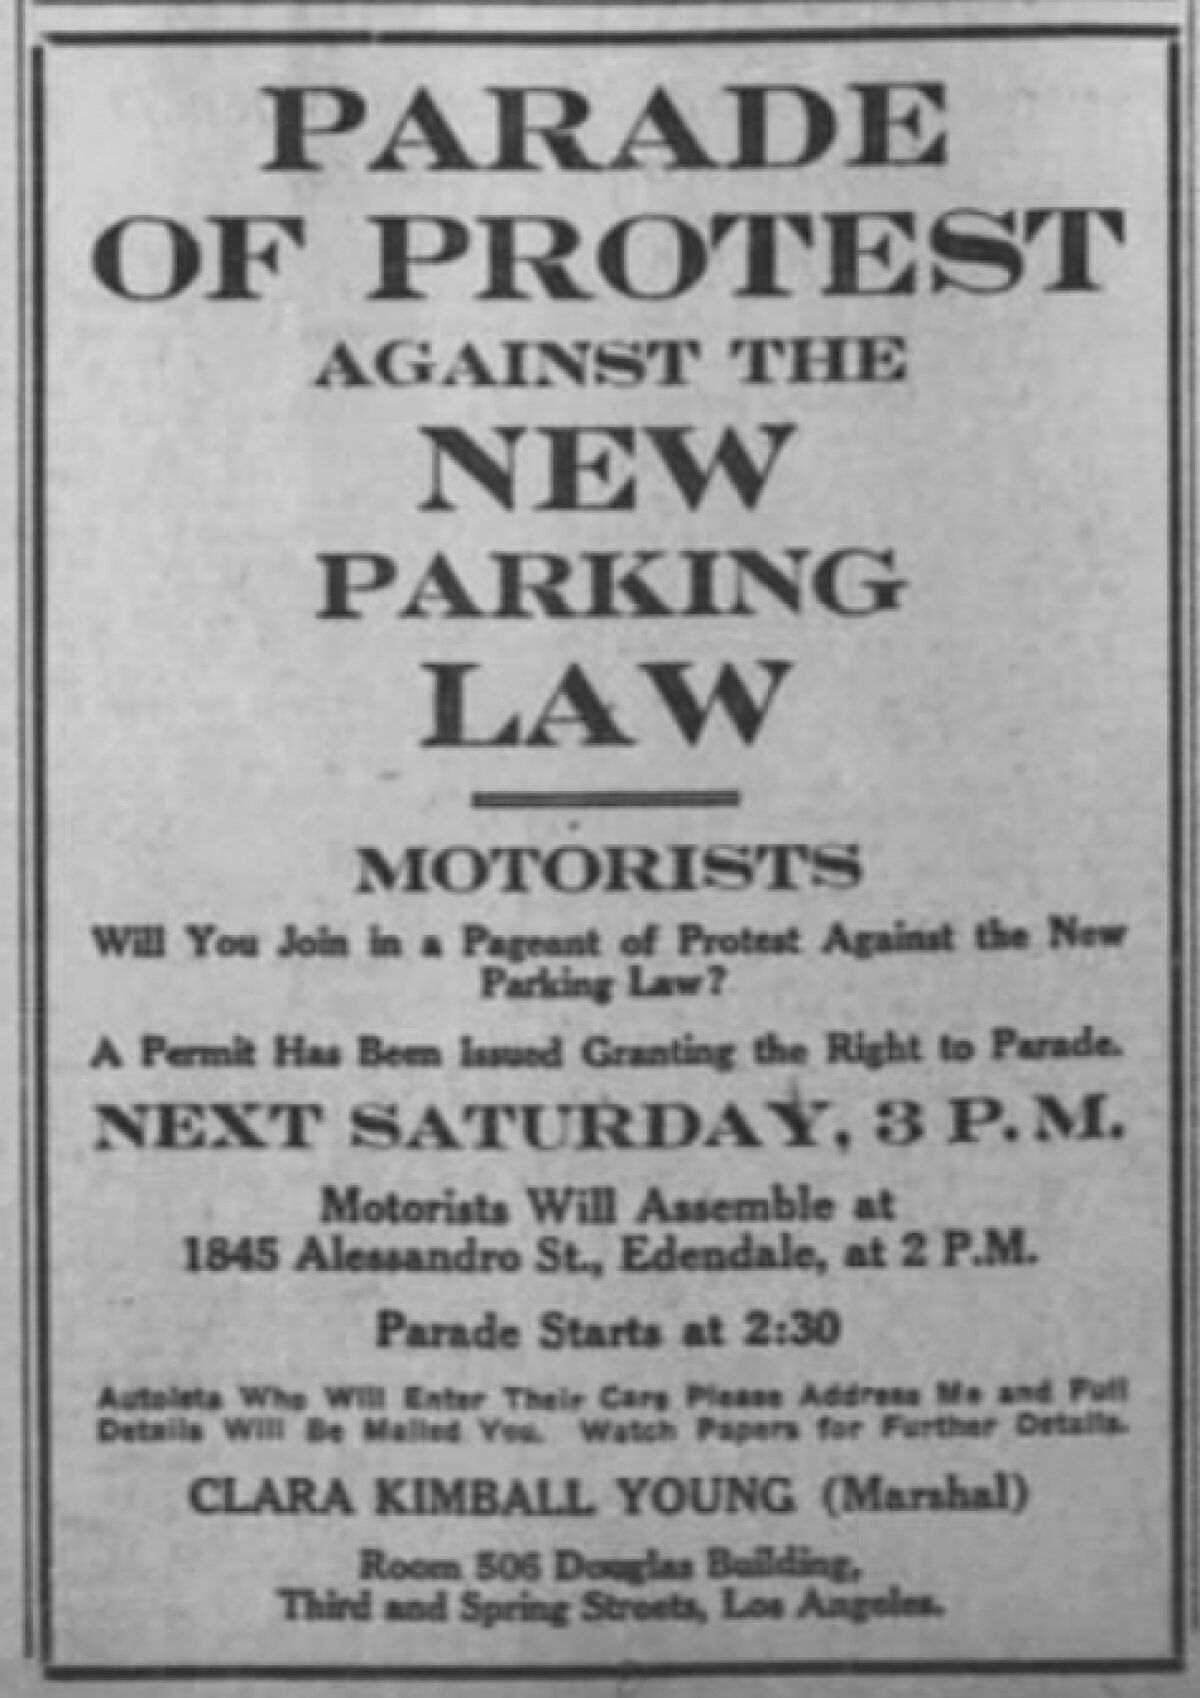 A newspaper ad in 1920 asked motorists to join a "parade of protest against the new parking law."